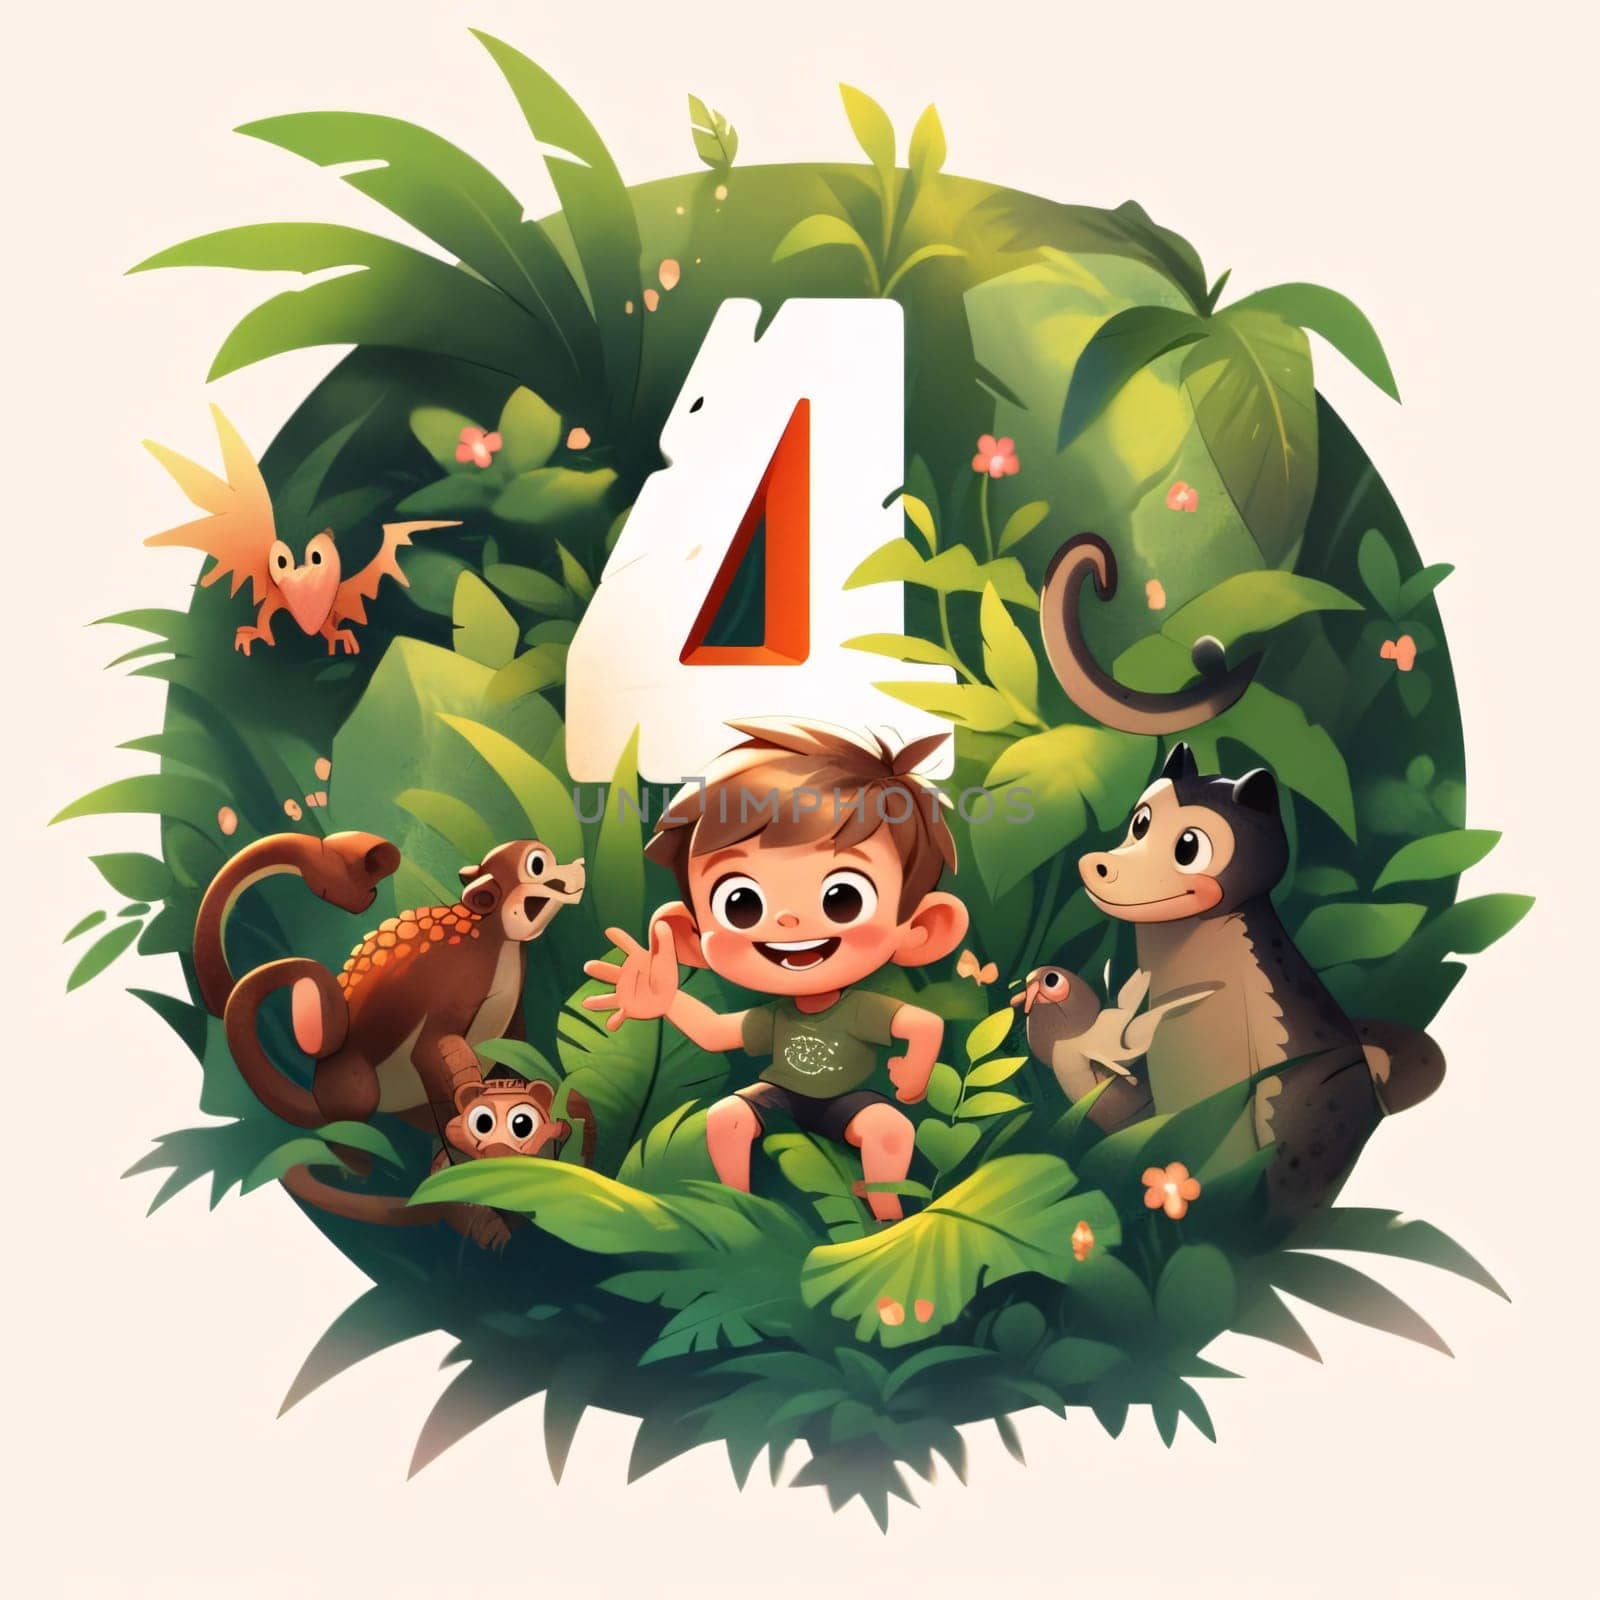 Graphic numbers: Cute little boy playing with animals in the jungle. Vector illustration.